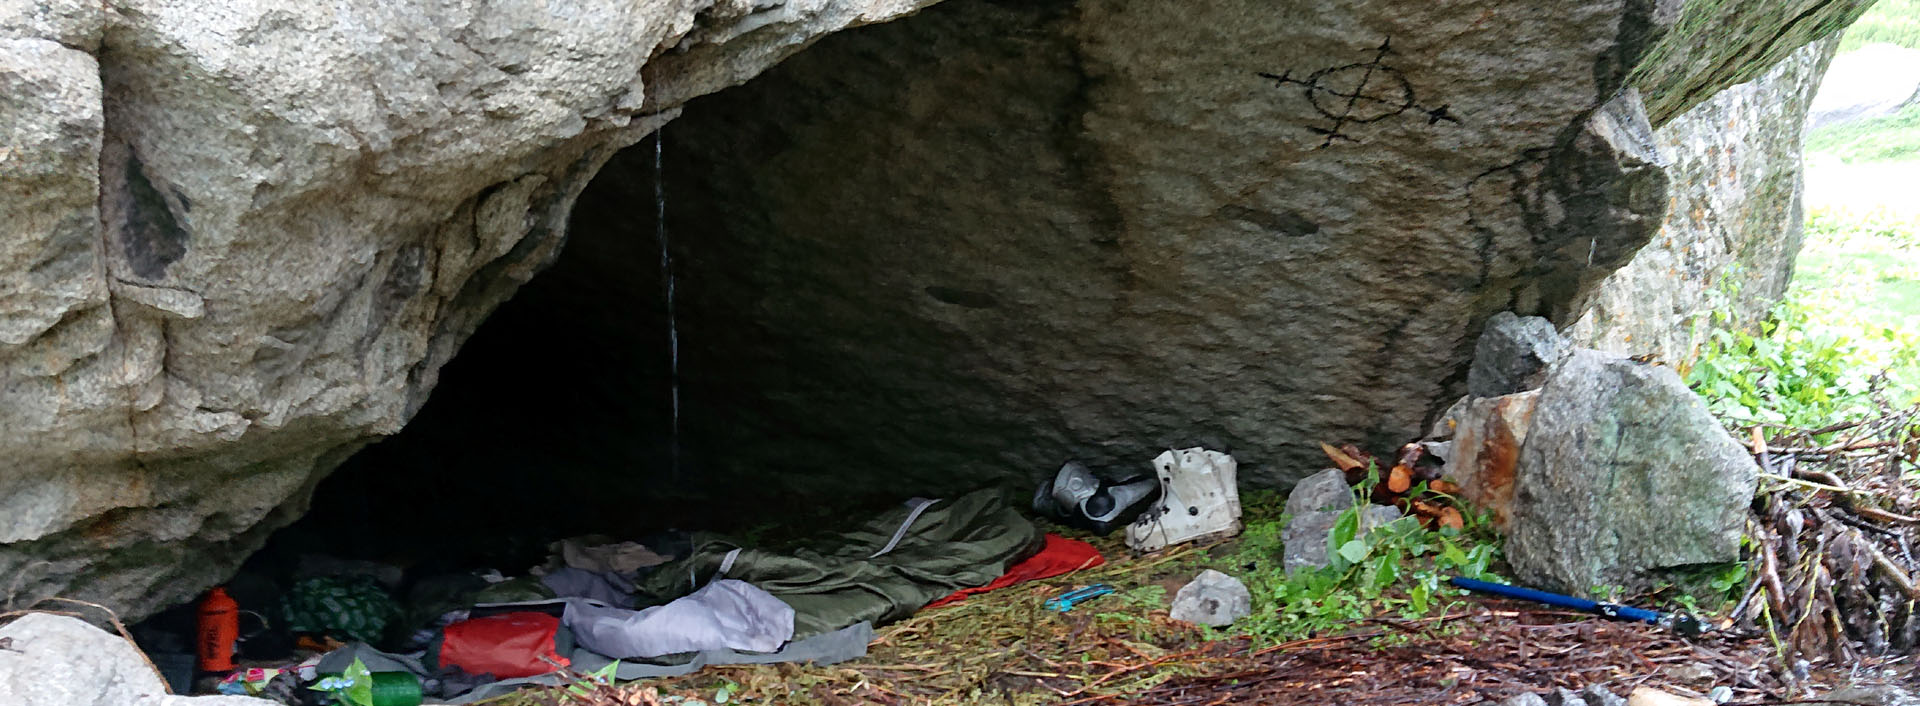 During a survival skill training, participants climb gear that is laying under a rock cave